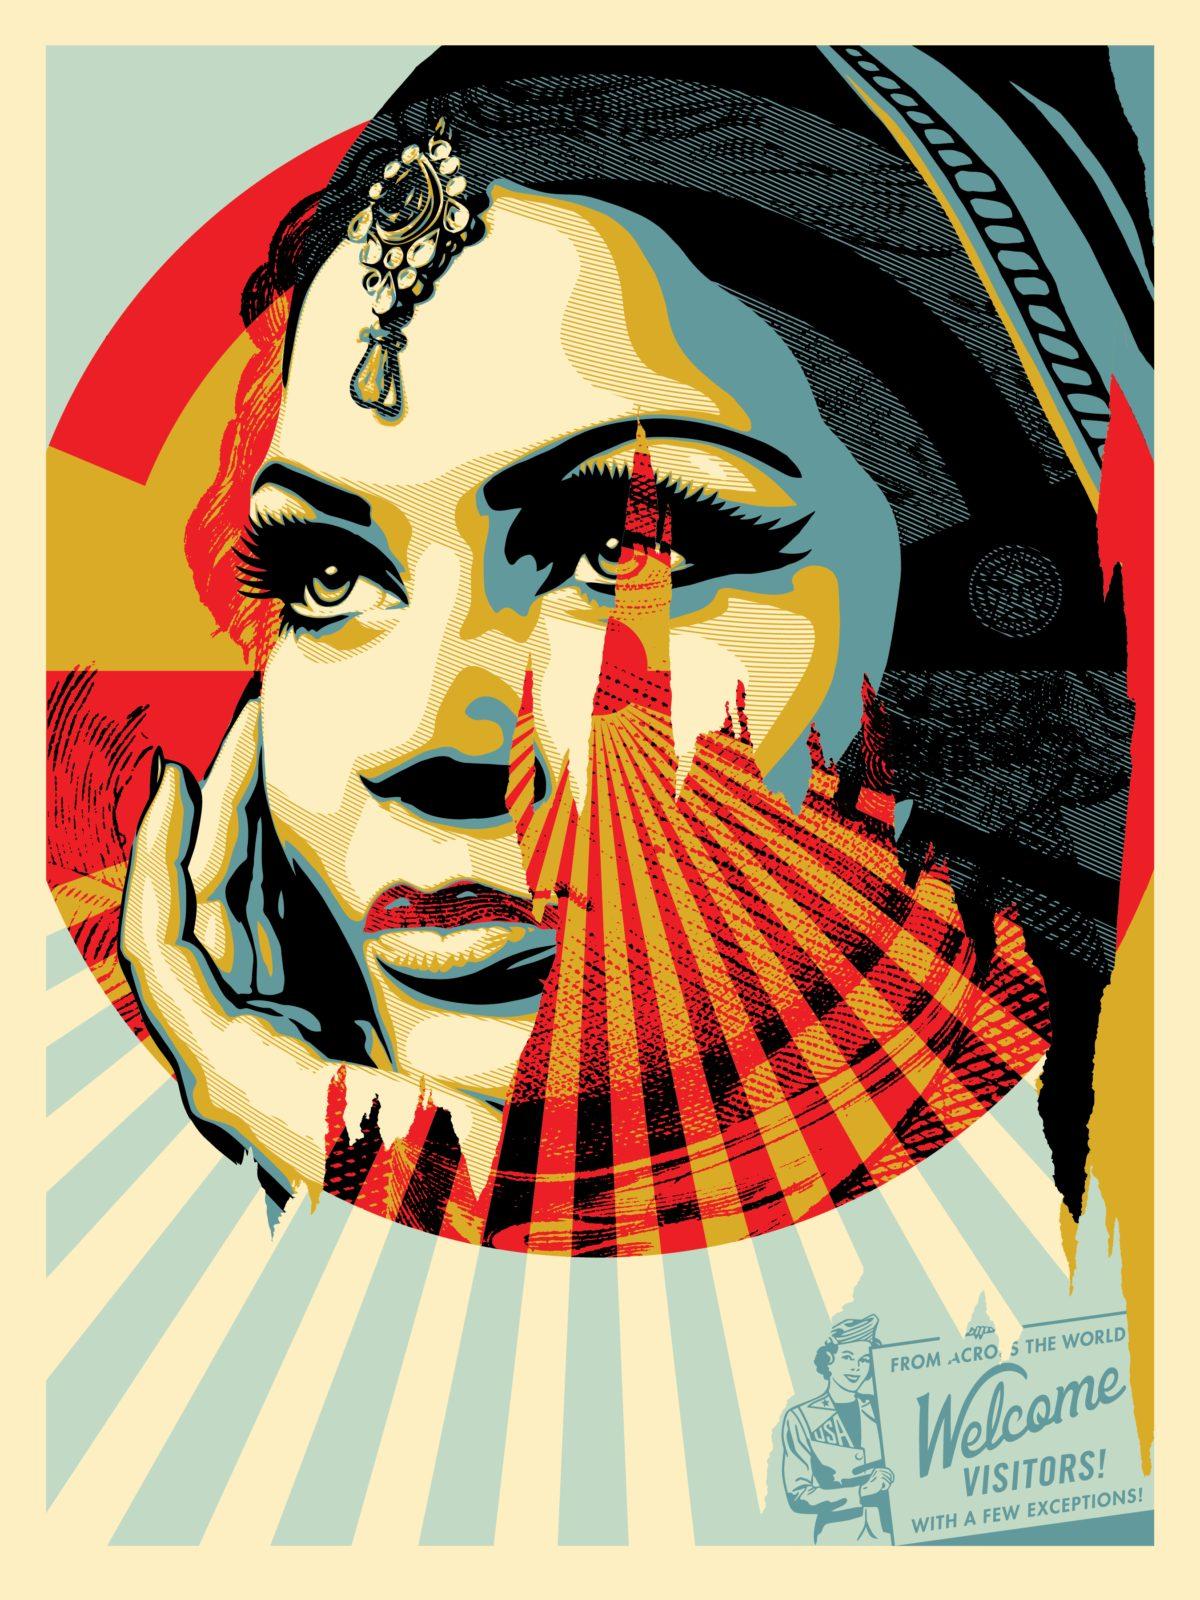 Target Exceptions Signed and Numbered Screenprint - Print by Shepard Fairey